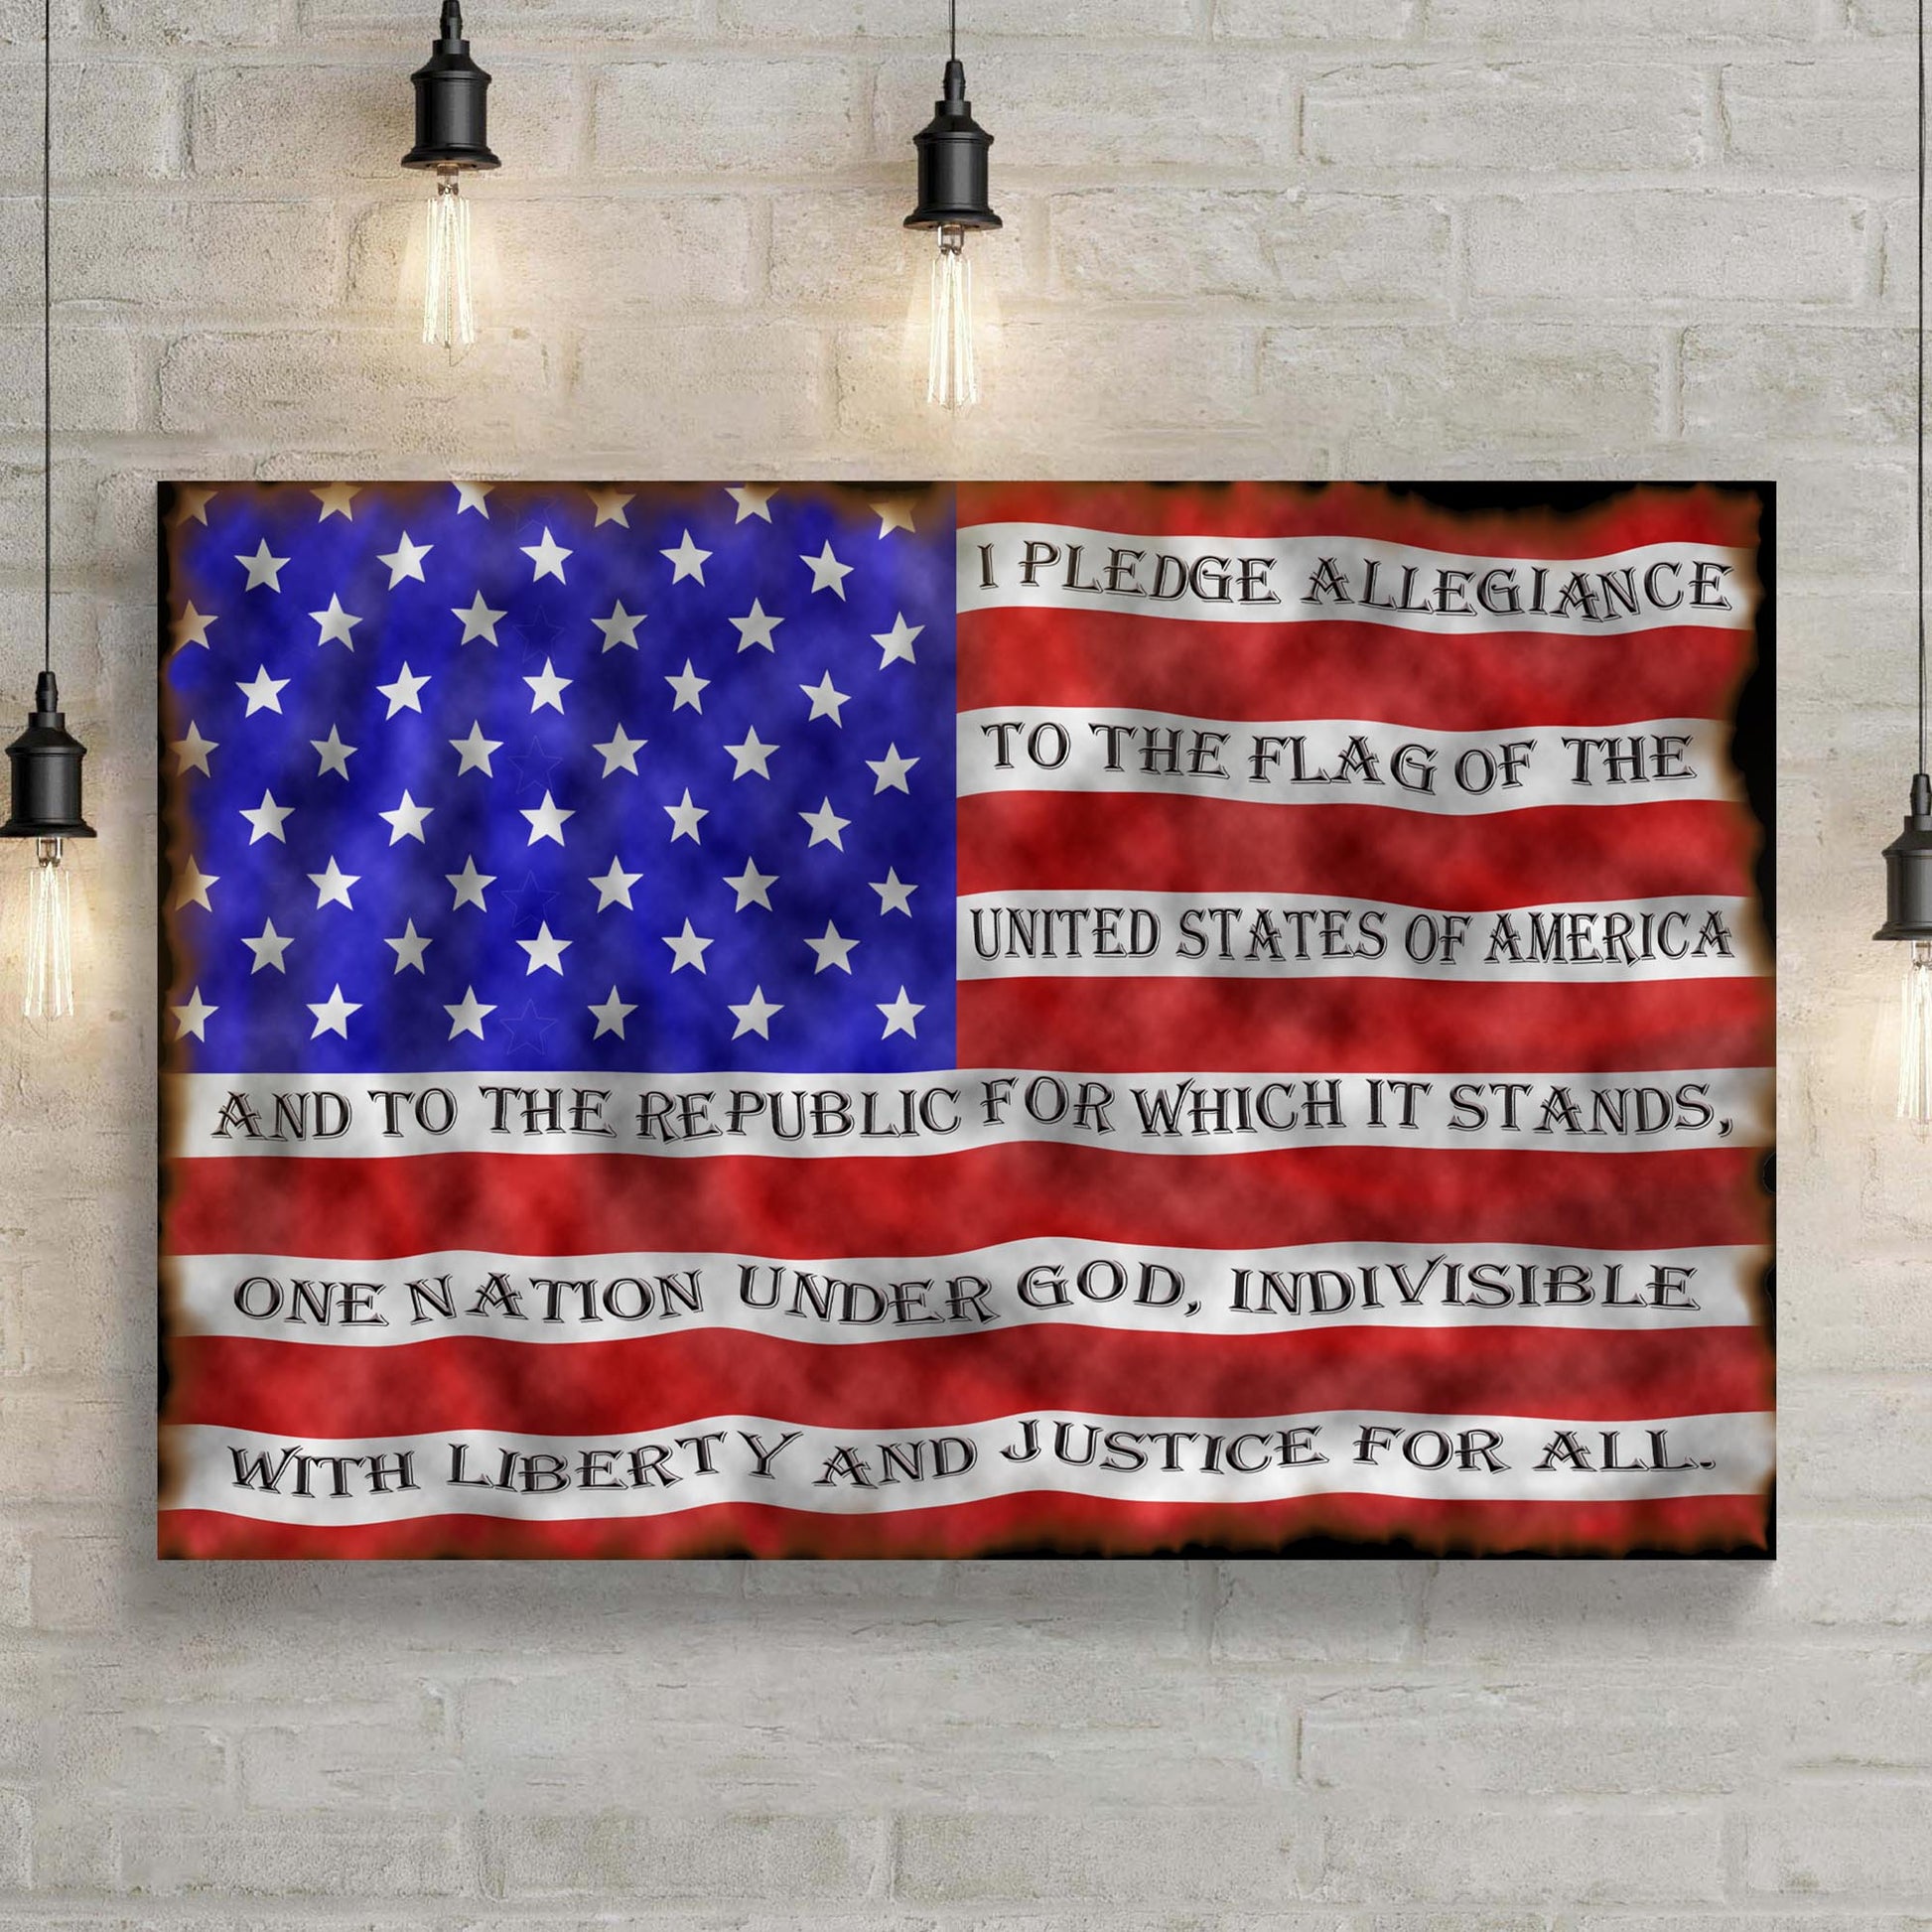 I Pledge Allegiance Sign Style 2 - Image by Tailored Canvases